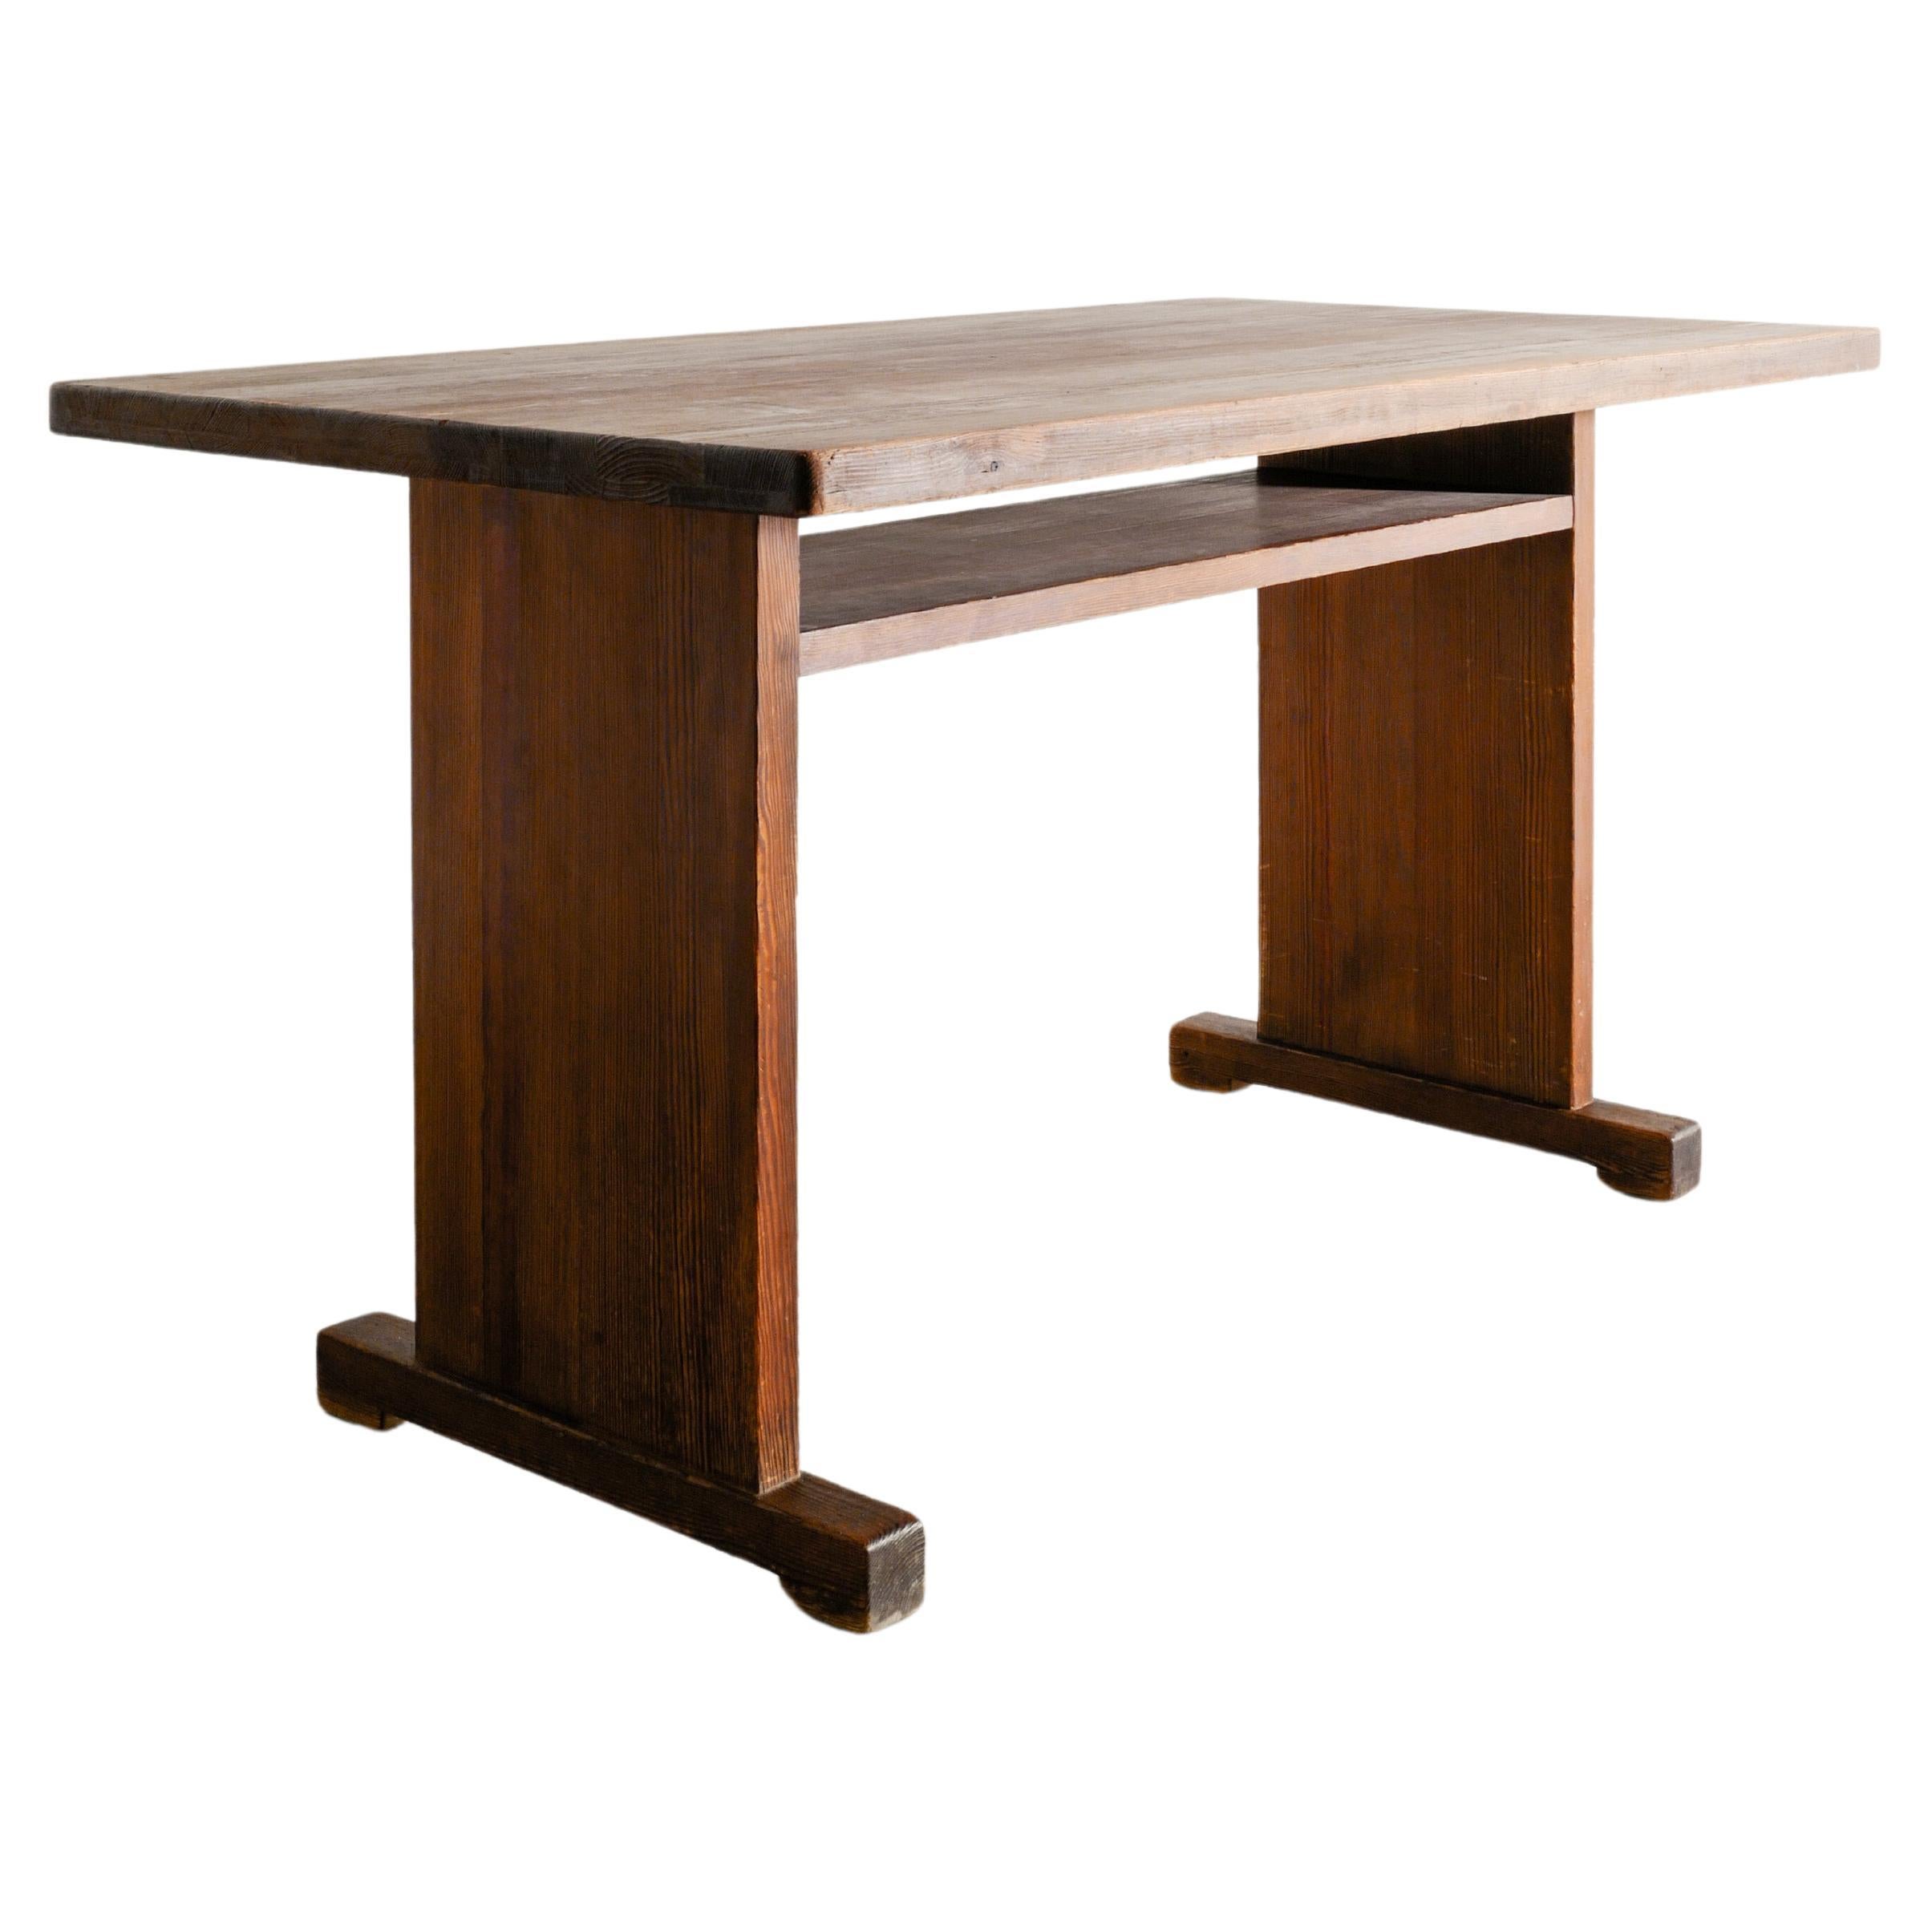 Swedish Pine Table / Desk in style of Axel Einar Hjorth Produced in Sweden 1930s